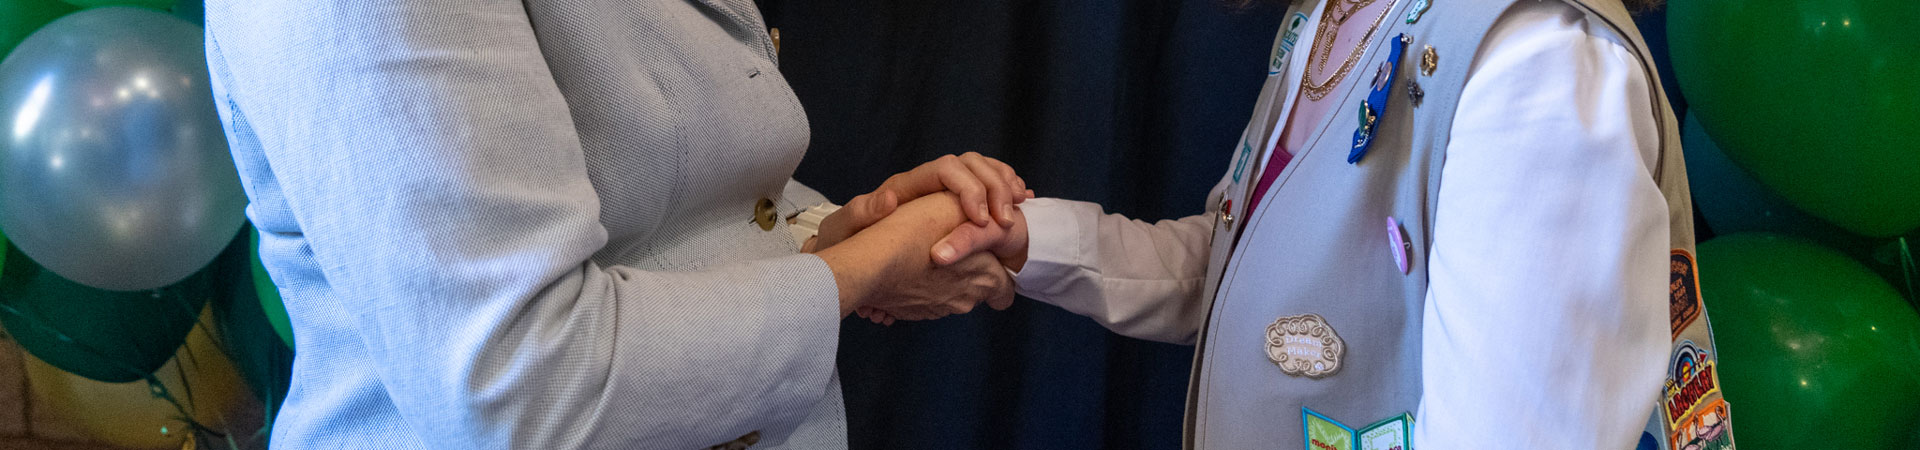  A Girl Scout shaking hands with one of Girl Scouts of Western Washington's community partners. There is a dark-blue stage curtain in the background. 